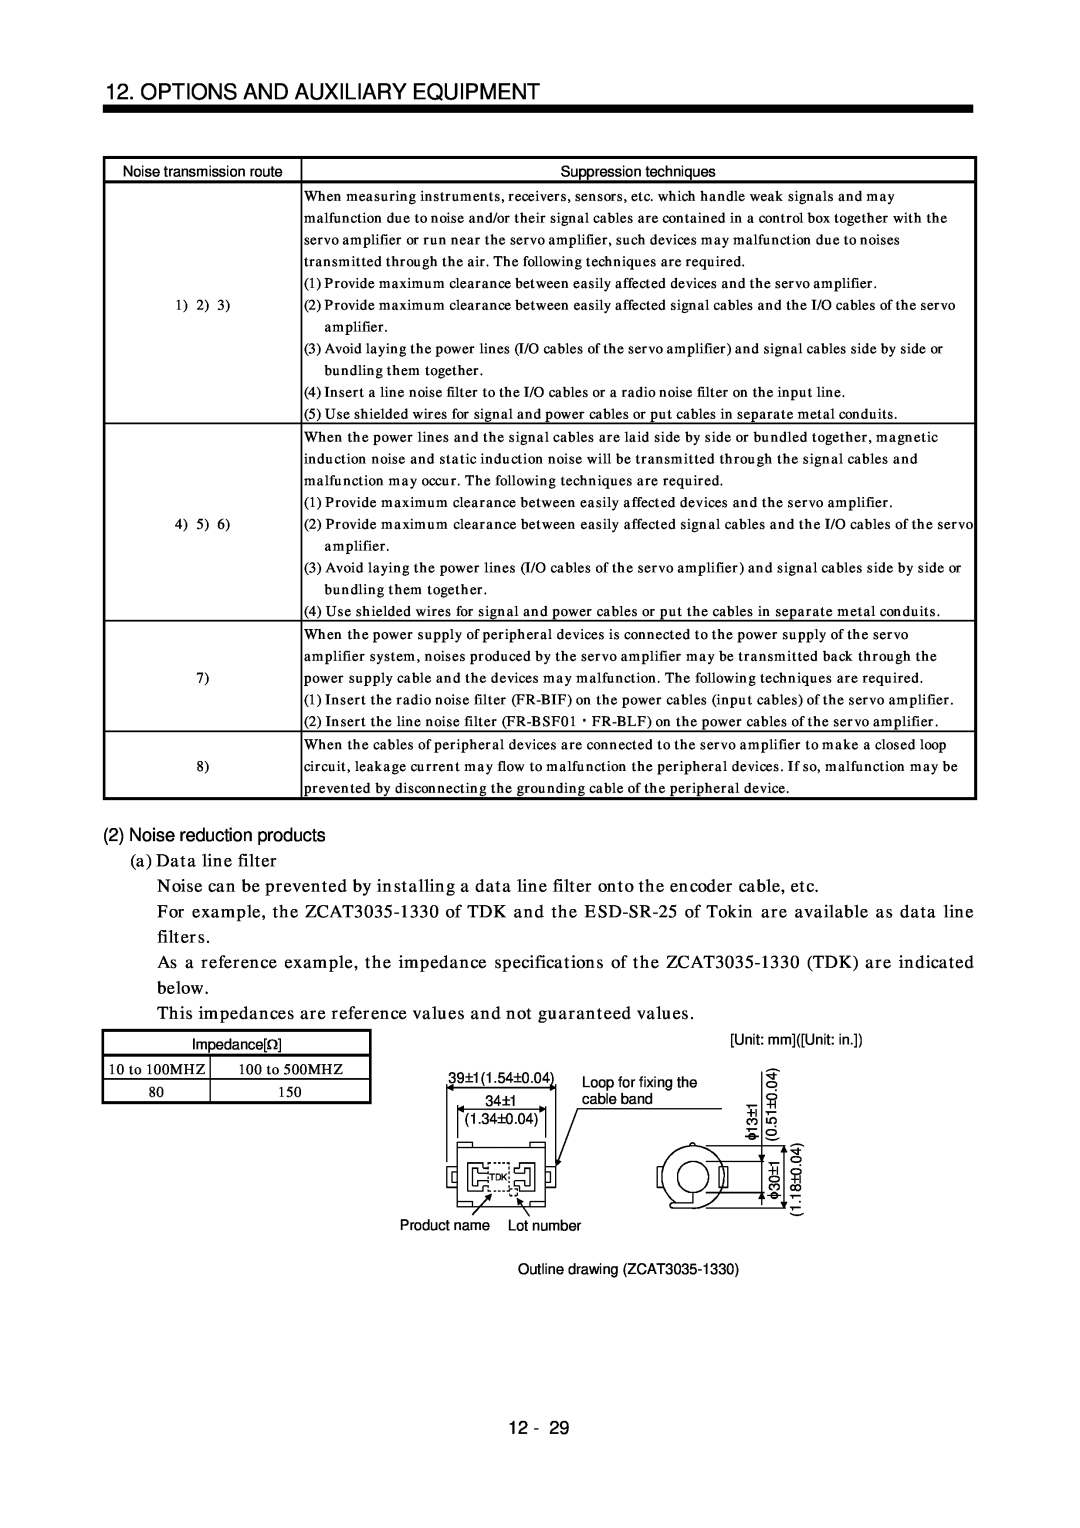 Bose MR-J2S- B instruction manual 2Noise reduction products, Options And Auxiliary Equipment, 12 